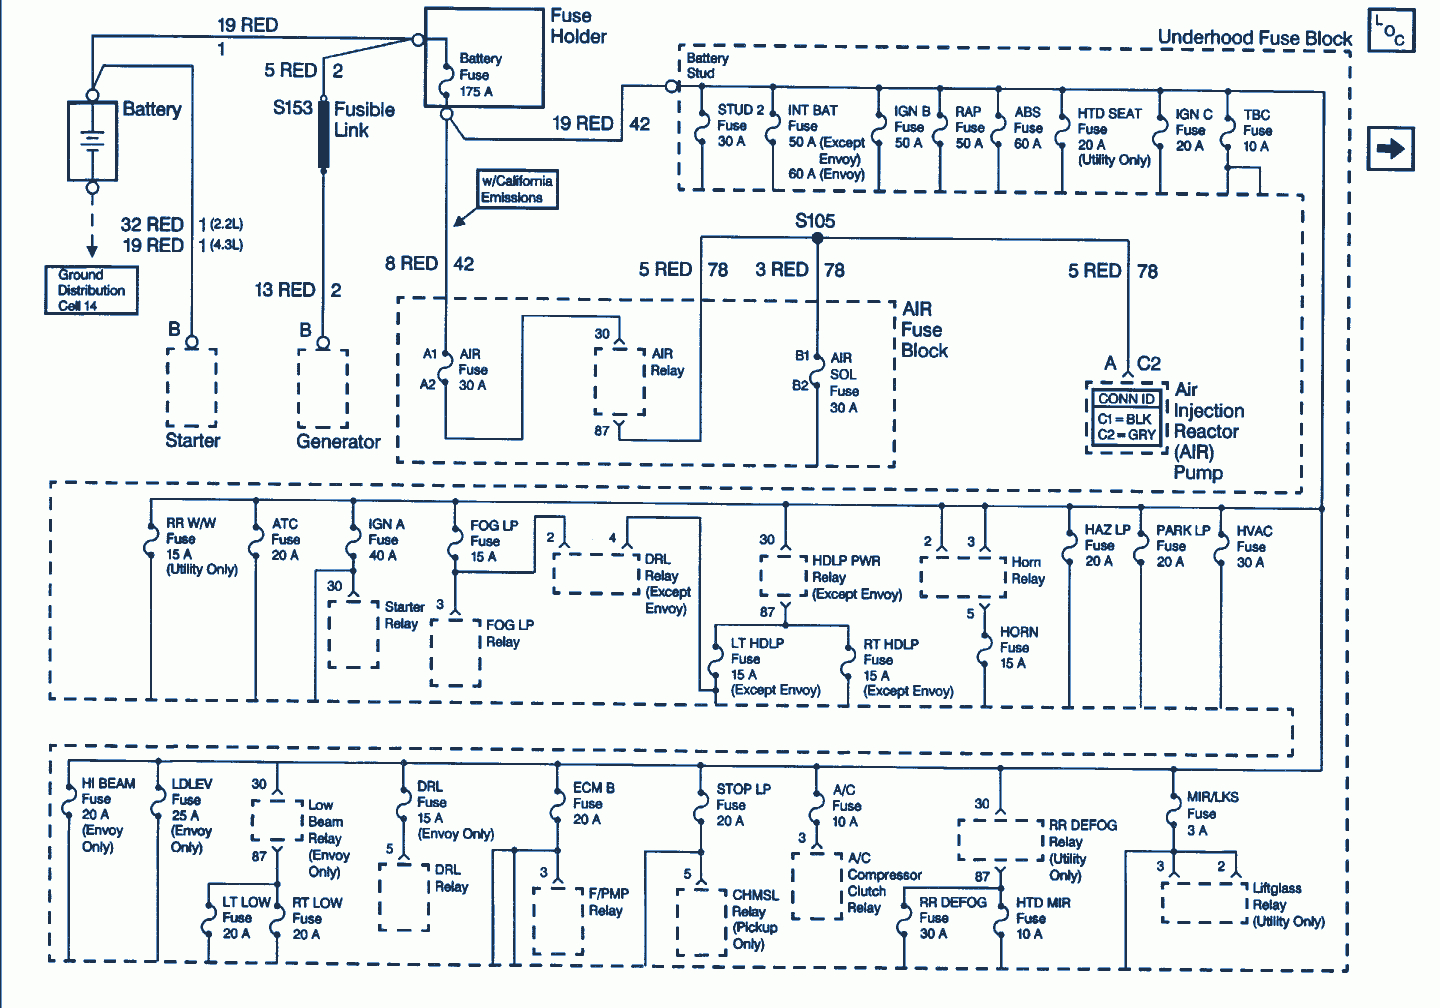 Chevy S10 Electrical Diagram - Wiring Diagram Explained - 2000 Chevy S10 Wiring Diagram